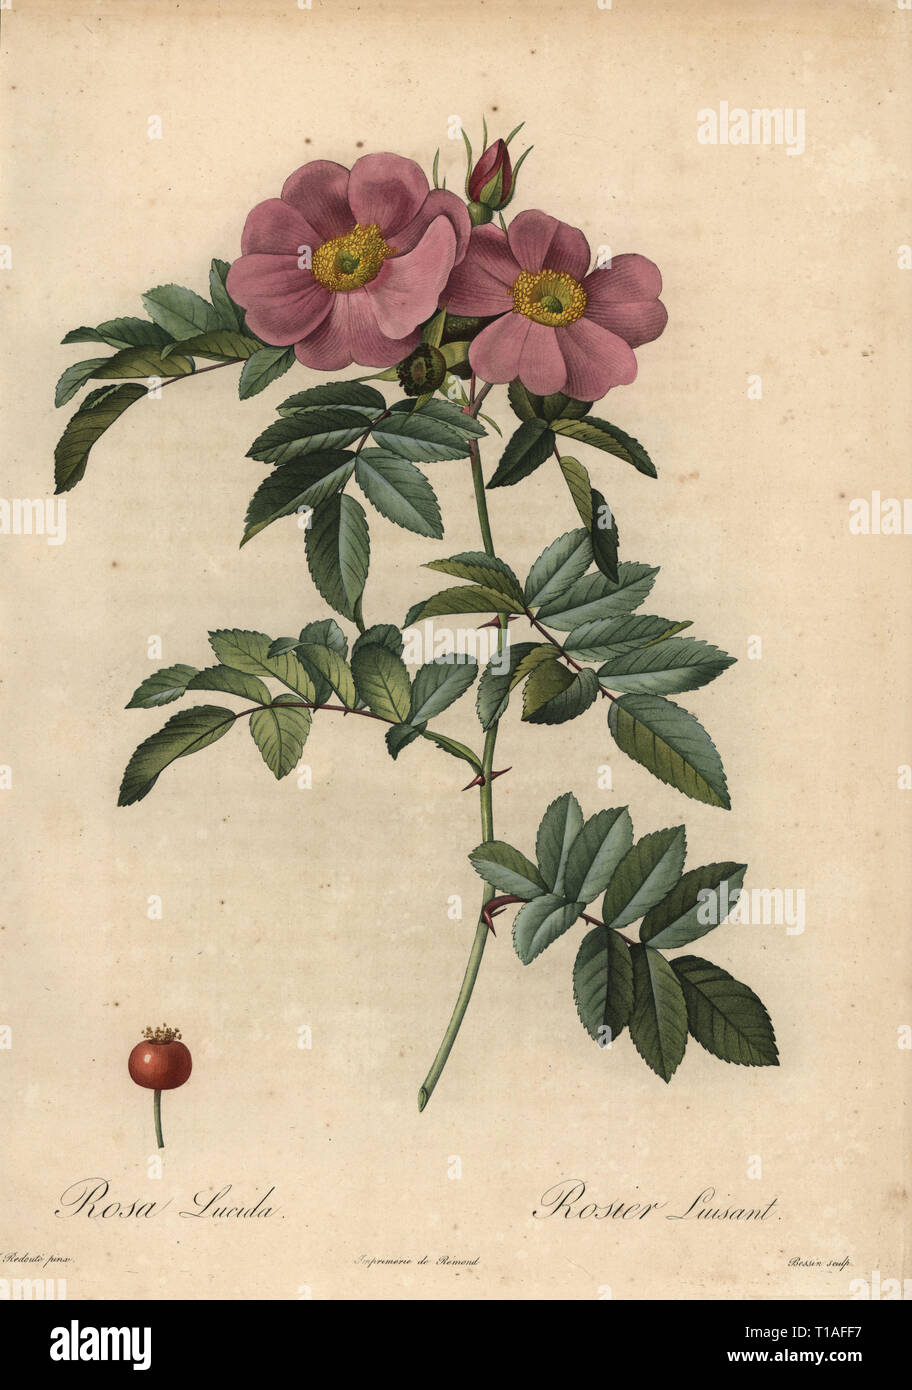 Violet Virginia rose, Rosa virginiana. Rosa lucida, Rosier luisant. Rosier a feuilles luisantes. Stipple copperplate engraving by Rosine-Antoinette Bessin handcoloured a la poupee after a botanical illustration by Pierre-Joseph Redoute from the first folio edition of Les Roses, Firmin Didot, Paris, 1817. Stock Photo